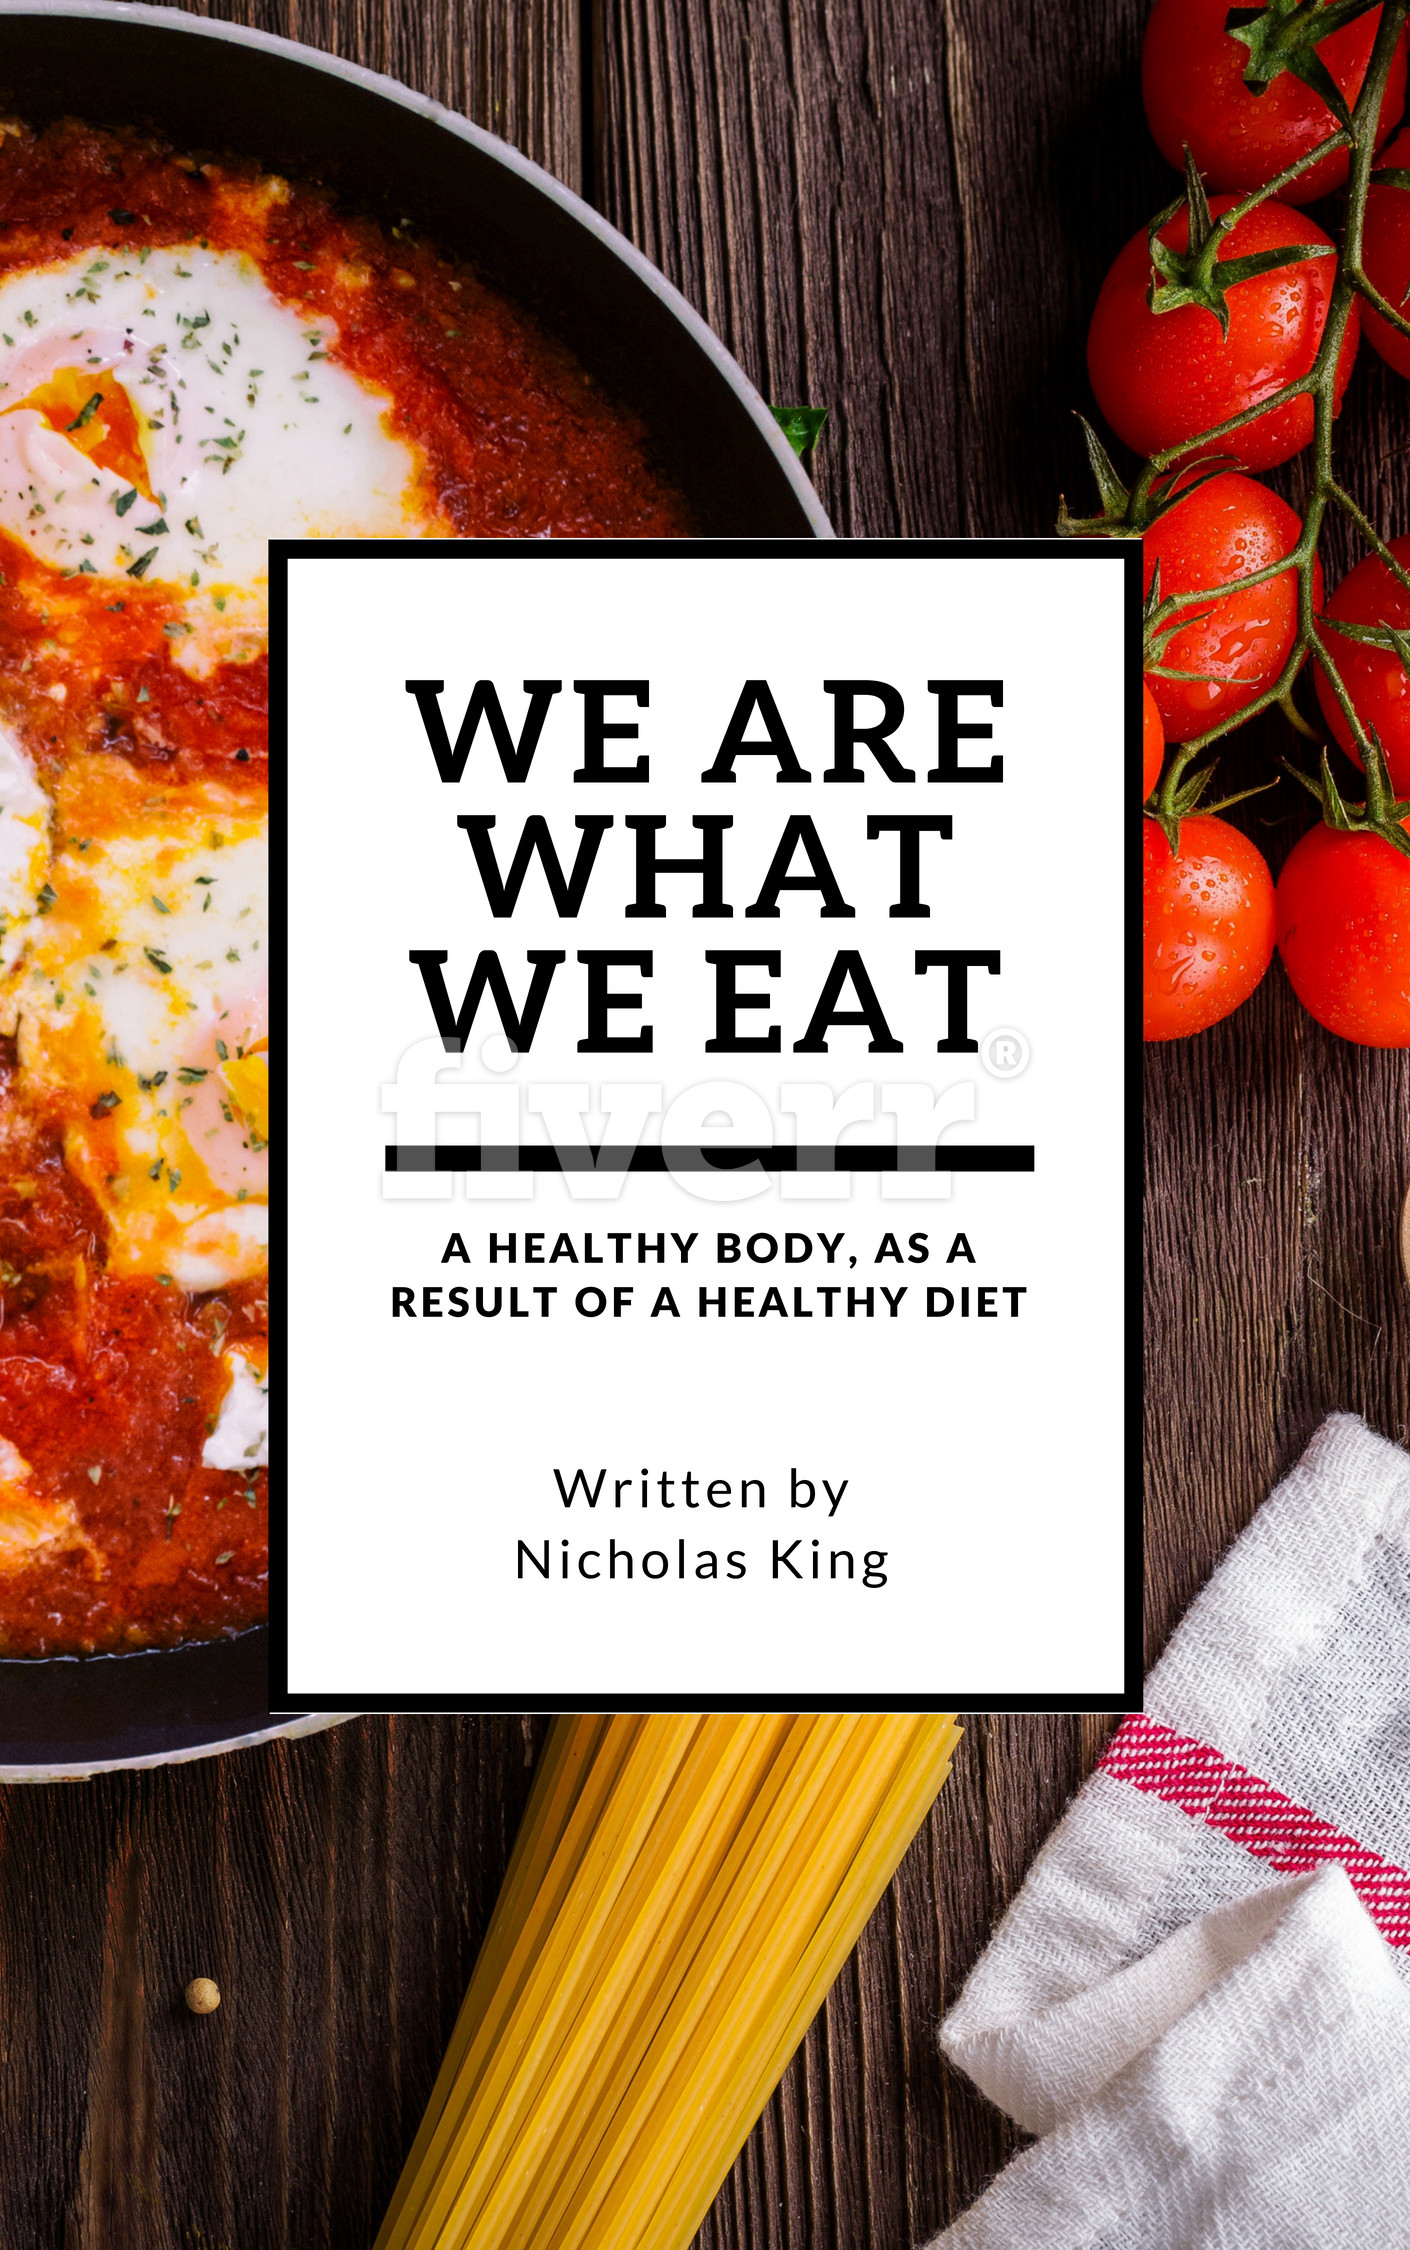 FREE: WE ARE WHAT WE EAT: A Helthy Body, As A Result Of Helthy Diet by Nicholas King